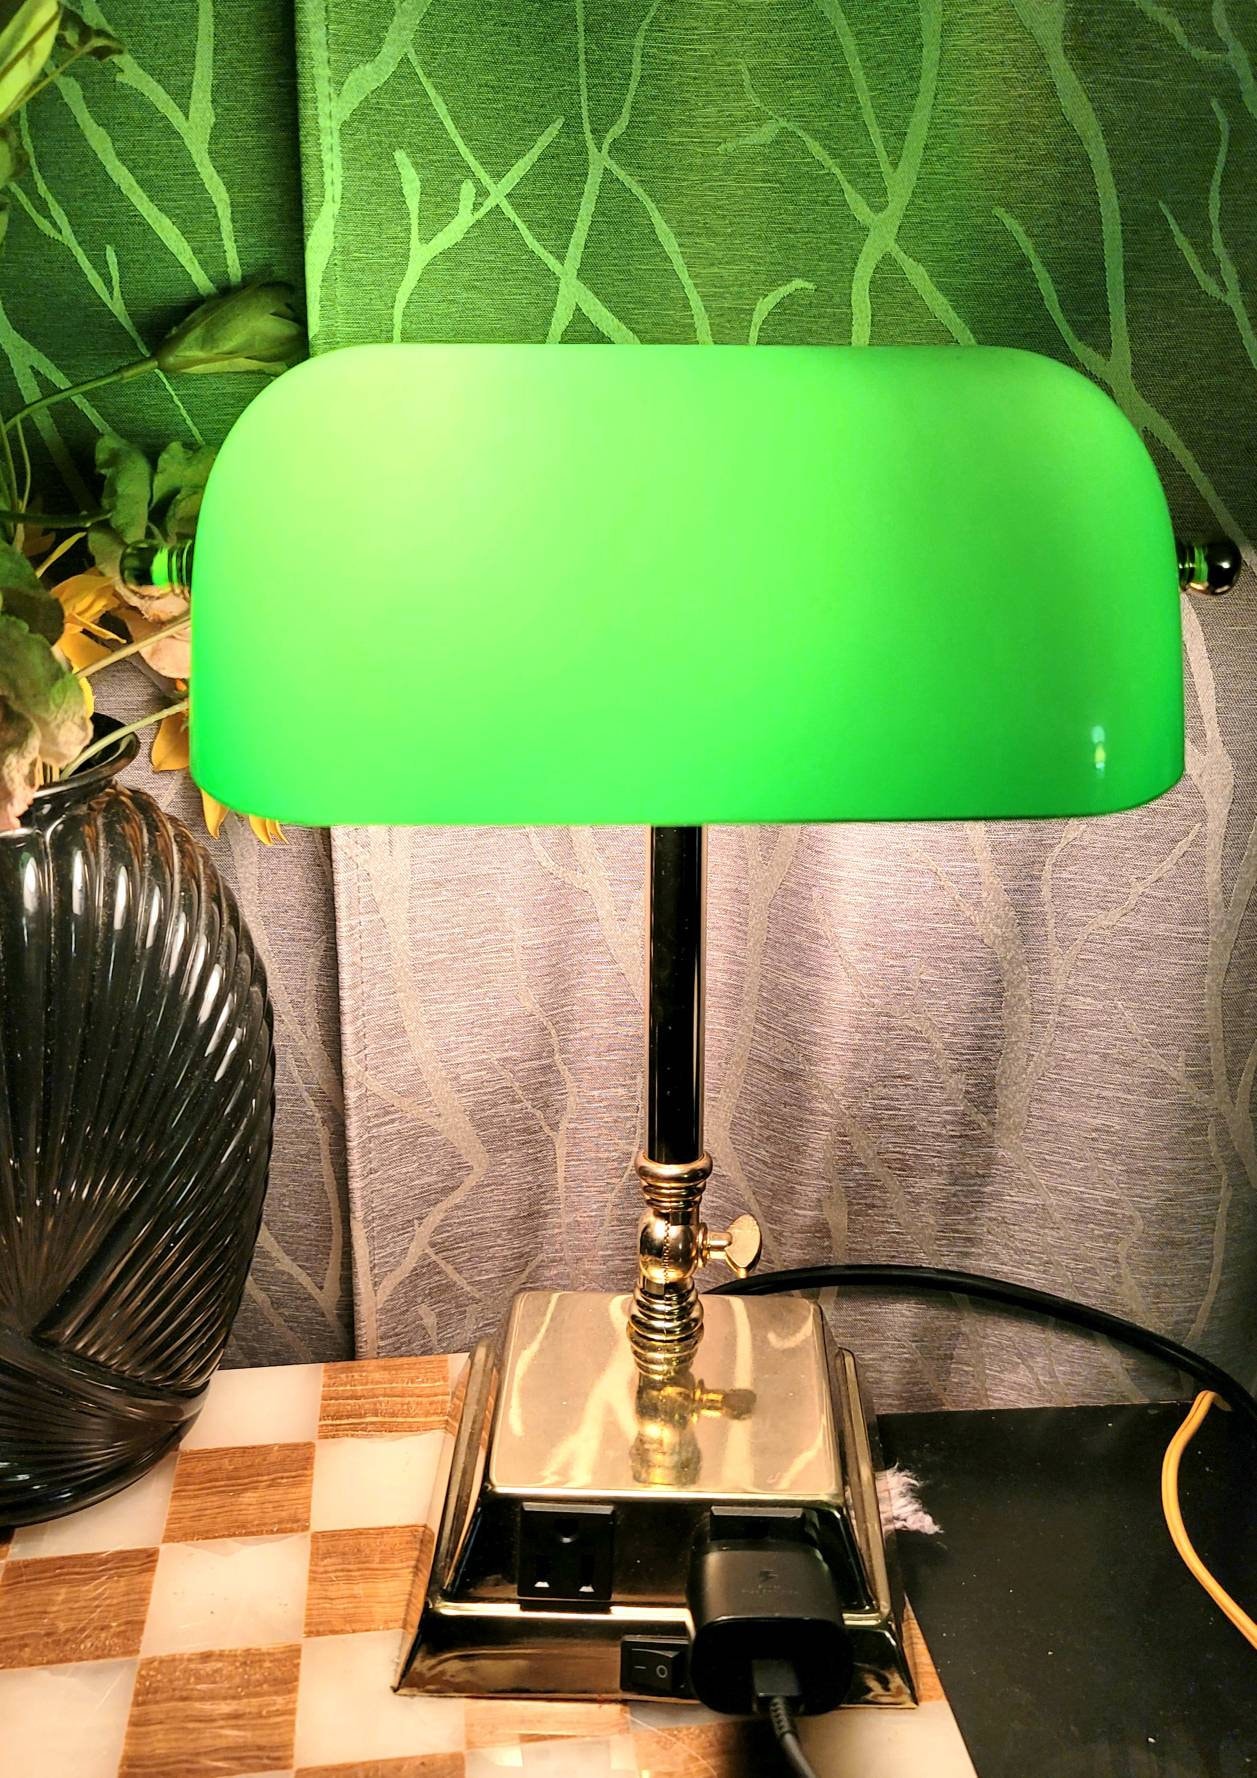 Bankers Lamp, Brass and Green Glass, Piano Lamp, Desk Lamp